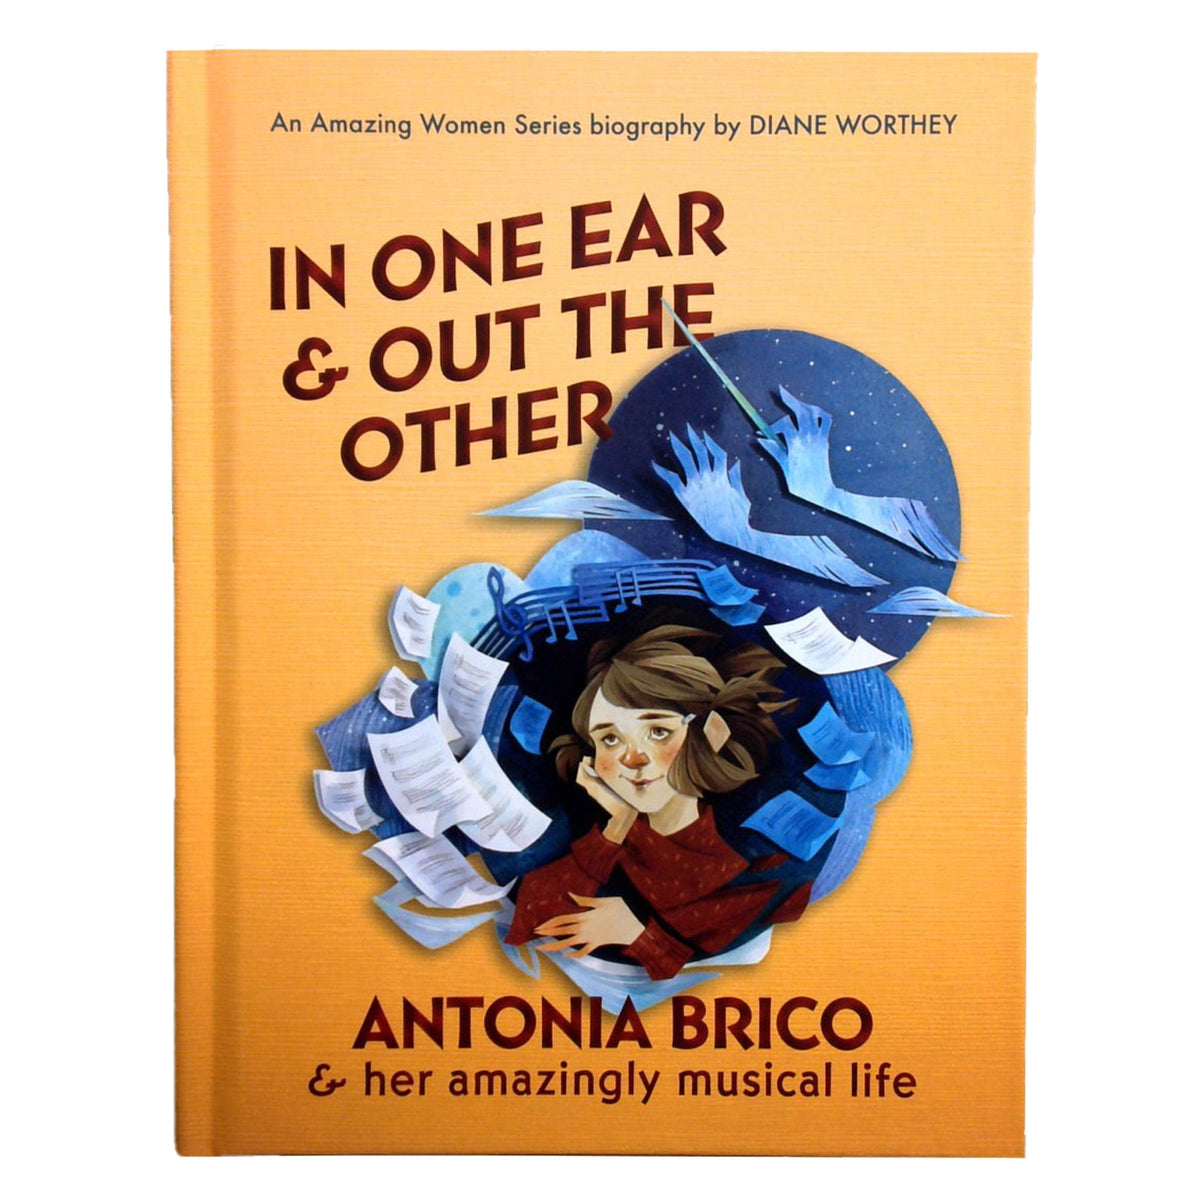 In One Ear and Out the Other: Antonia Brico and Her Amazingly Musical Life by Diane Worthey